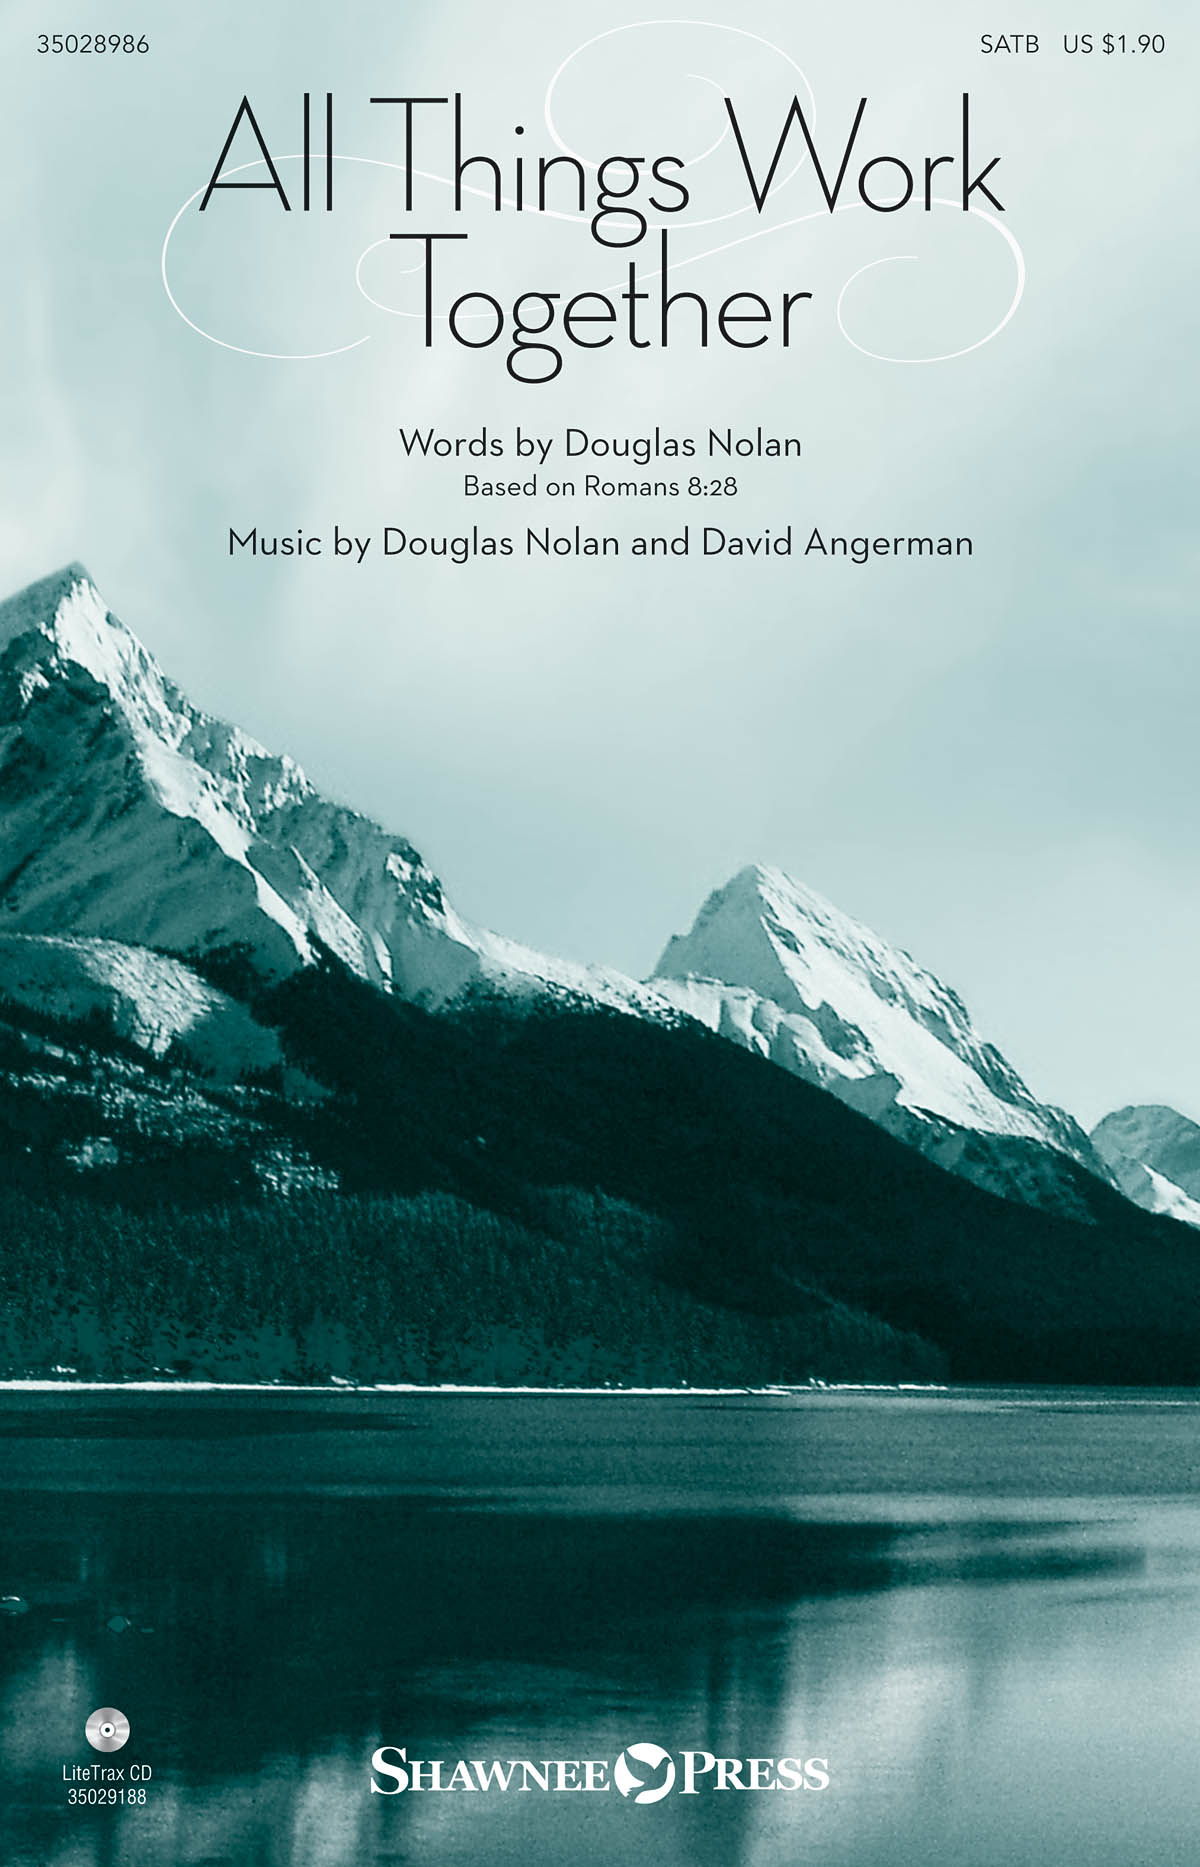 Douglas Nolan: All Things Work Together: SATB: Vocal Score